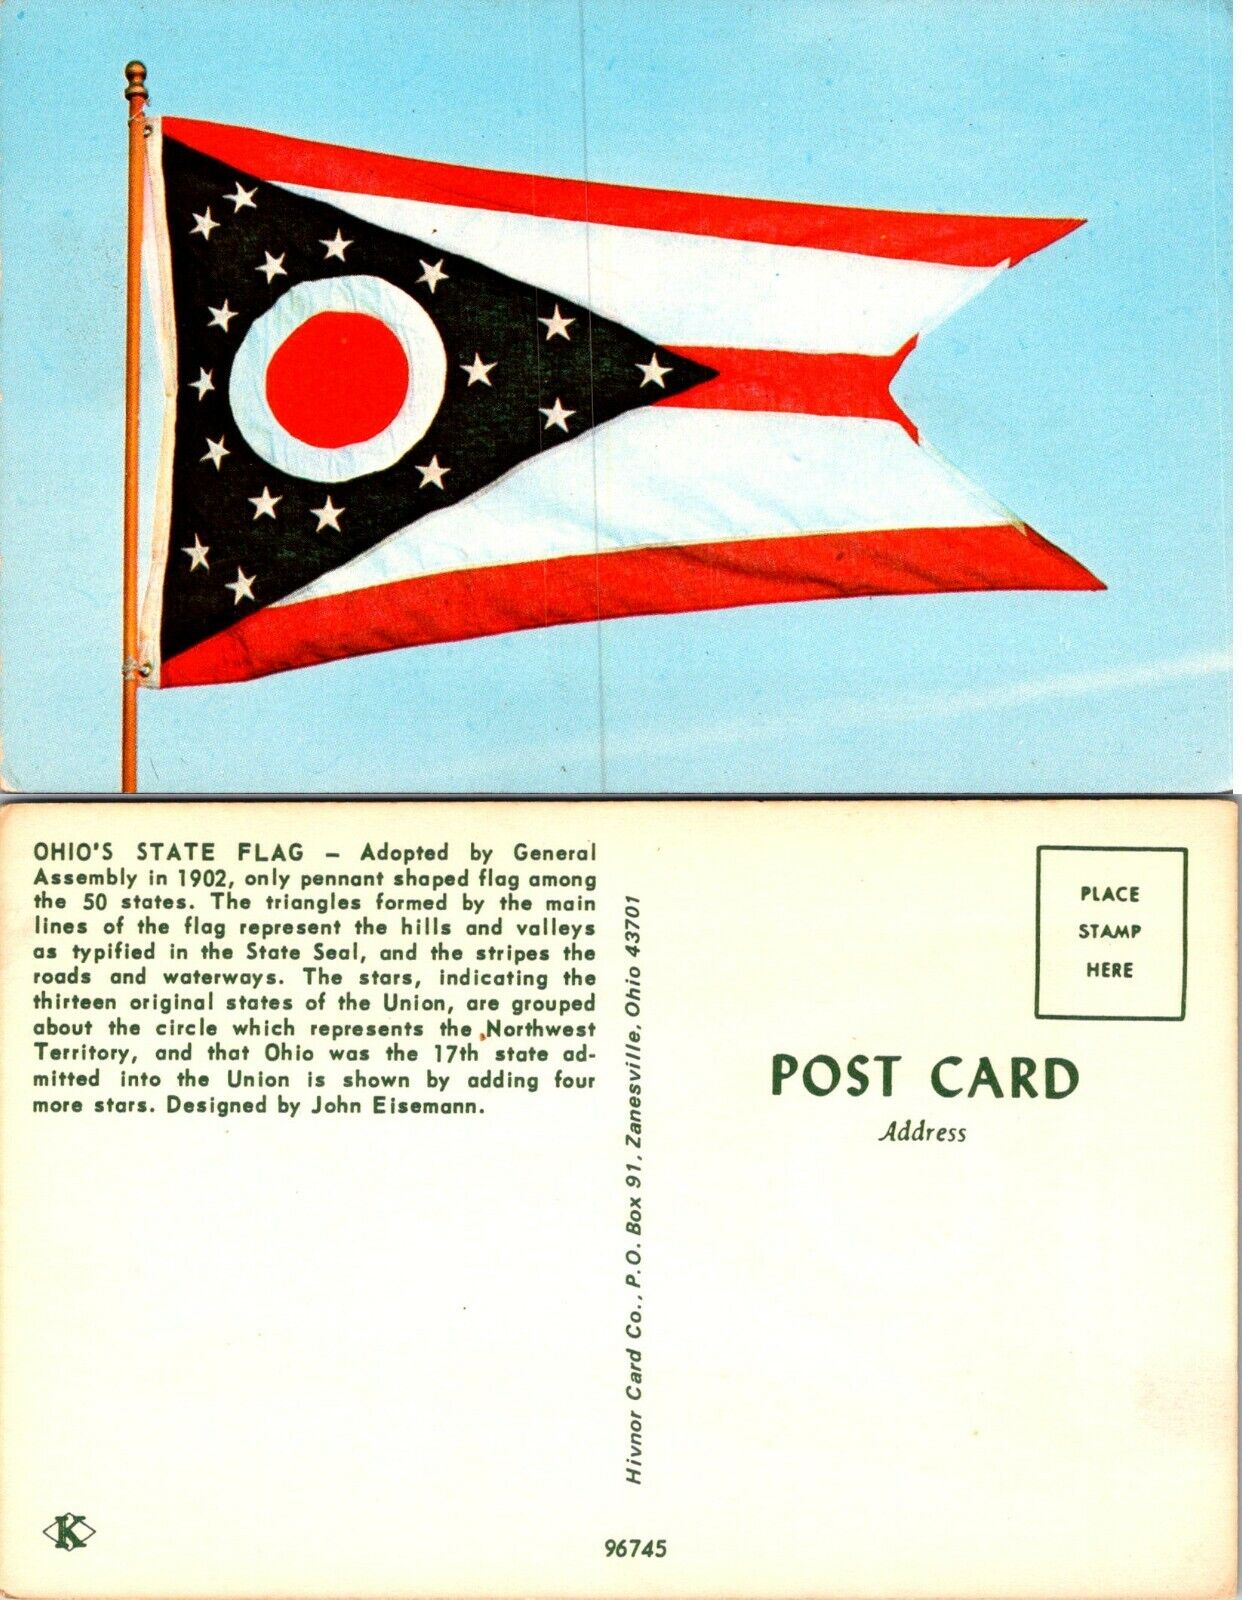 Ohio(OH) State Flag Flying with Blue Skies in the Background Vintage Postcard